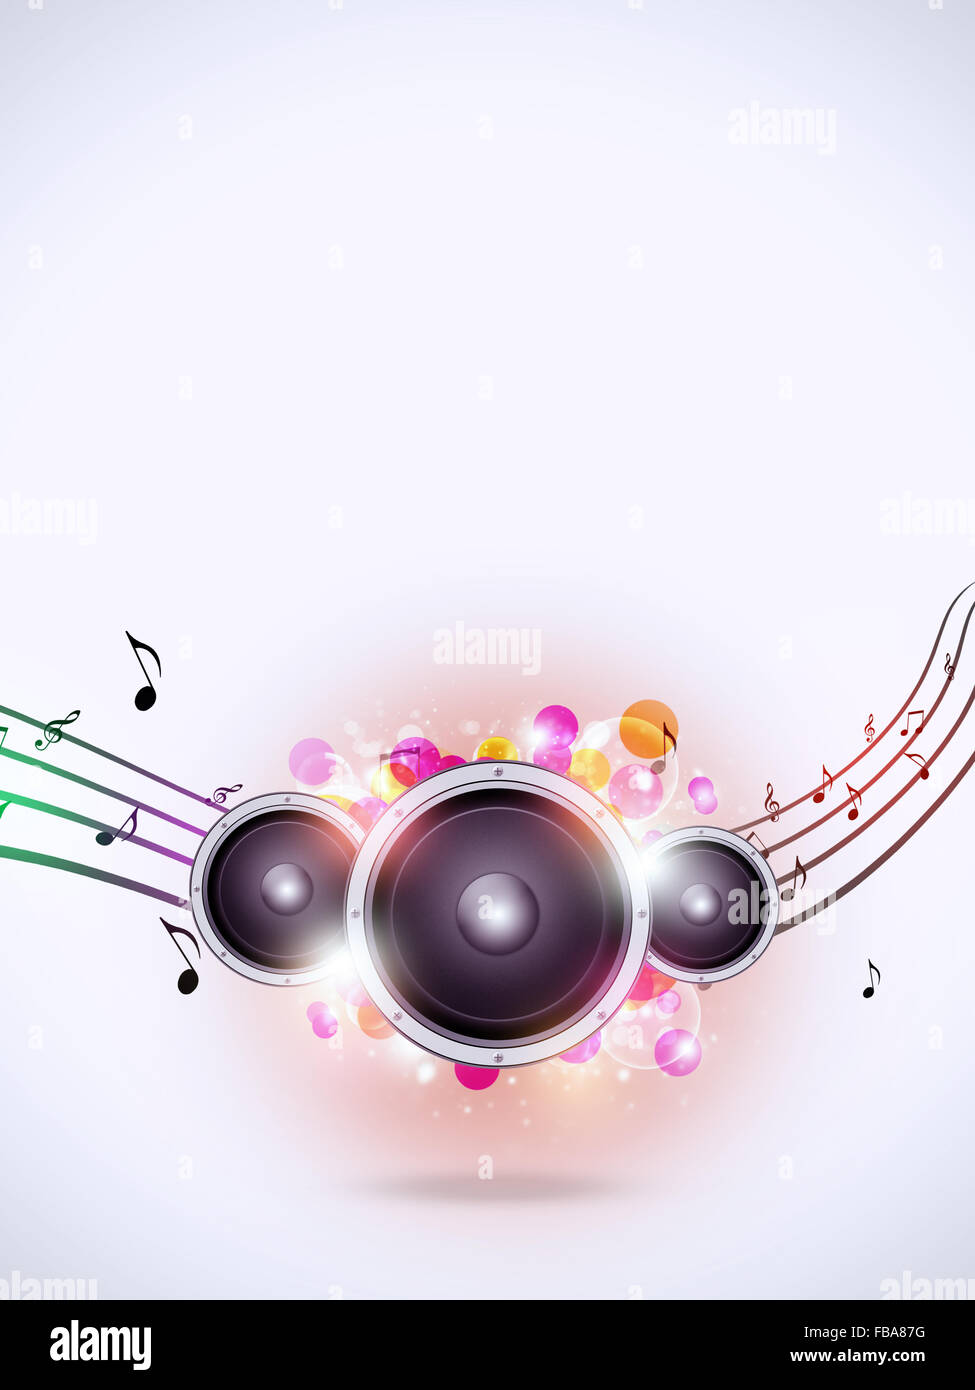 abstract music background with sound speaker and music notes Stock Photo -  Alamy